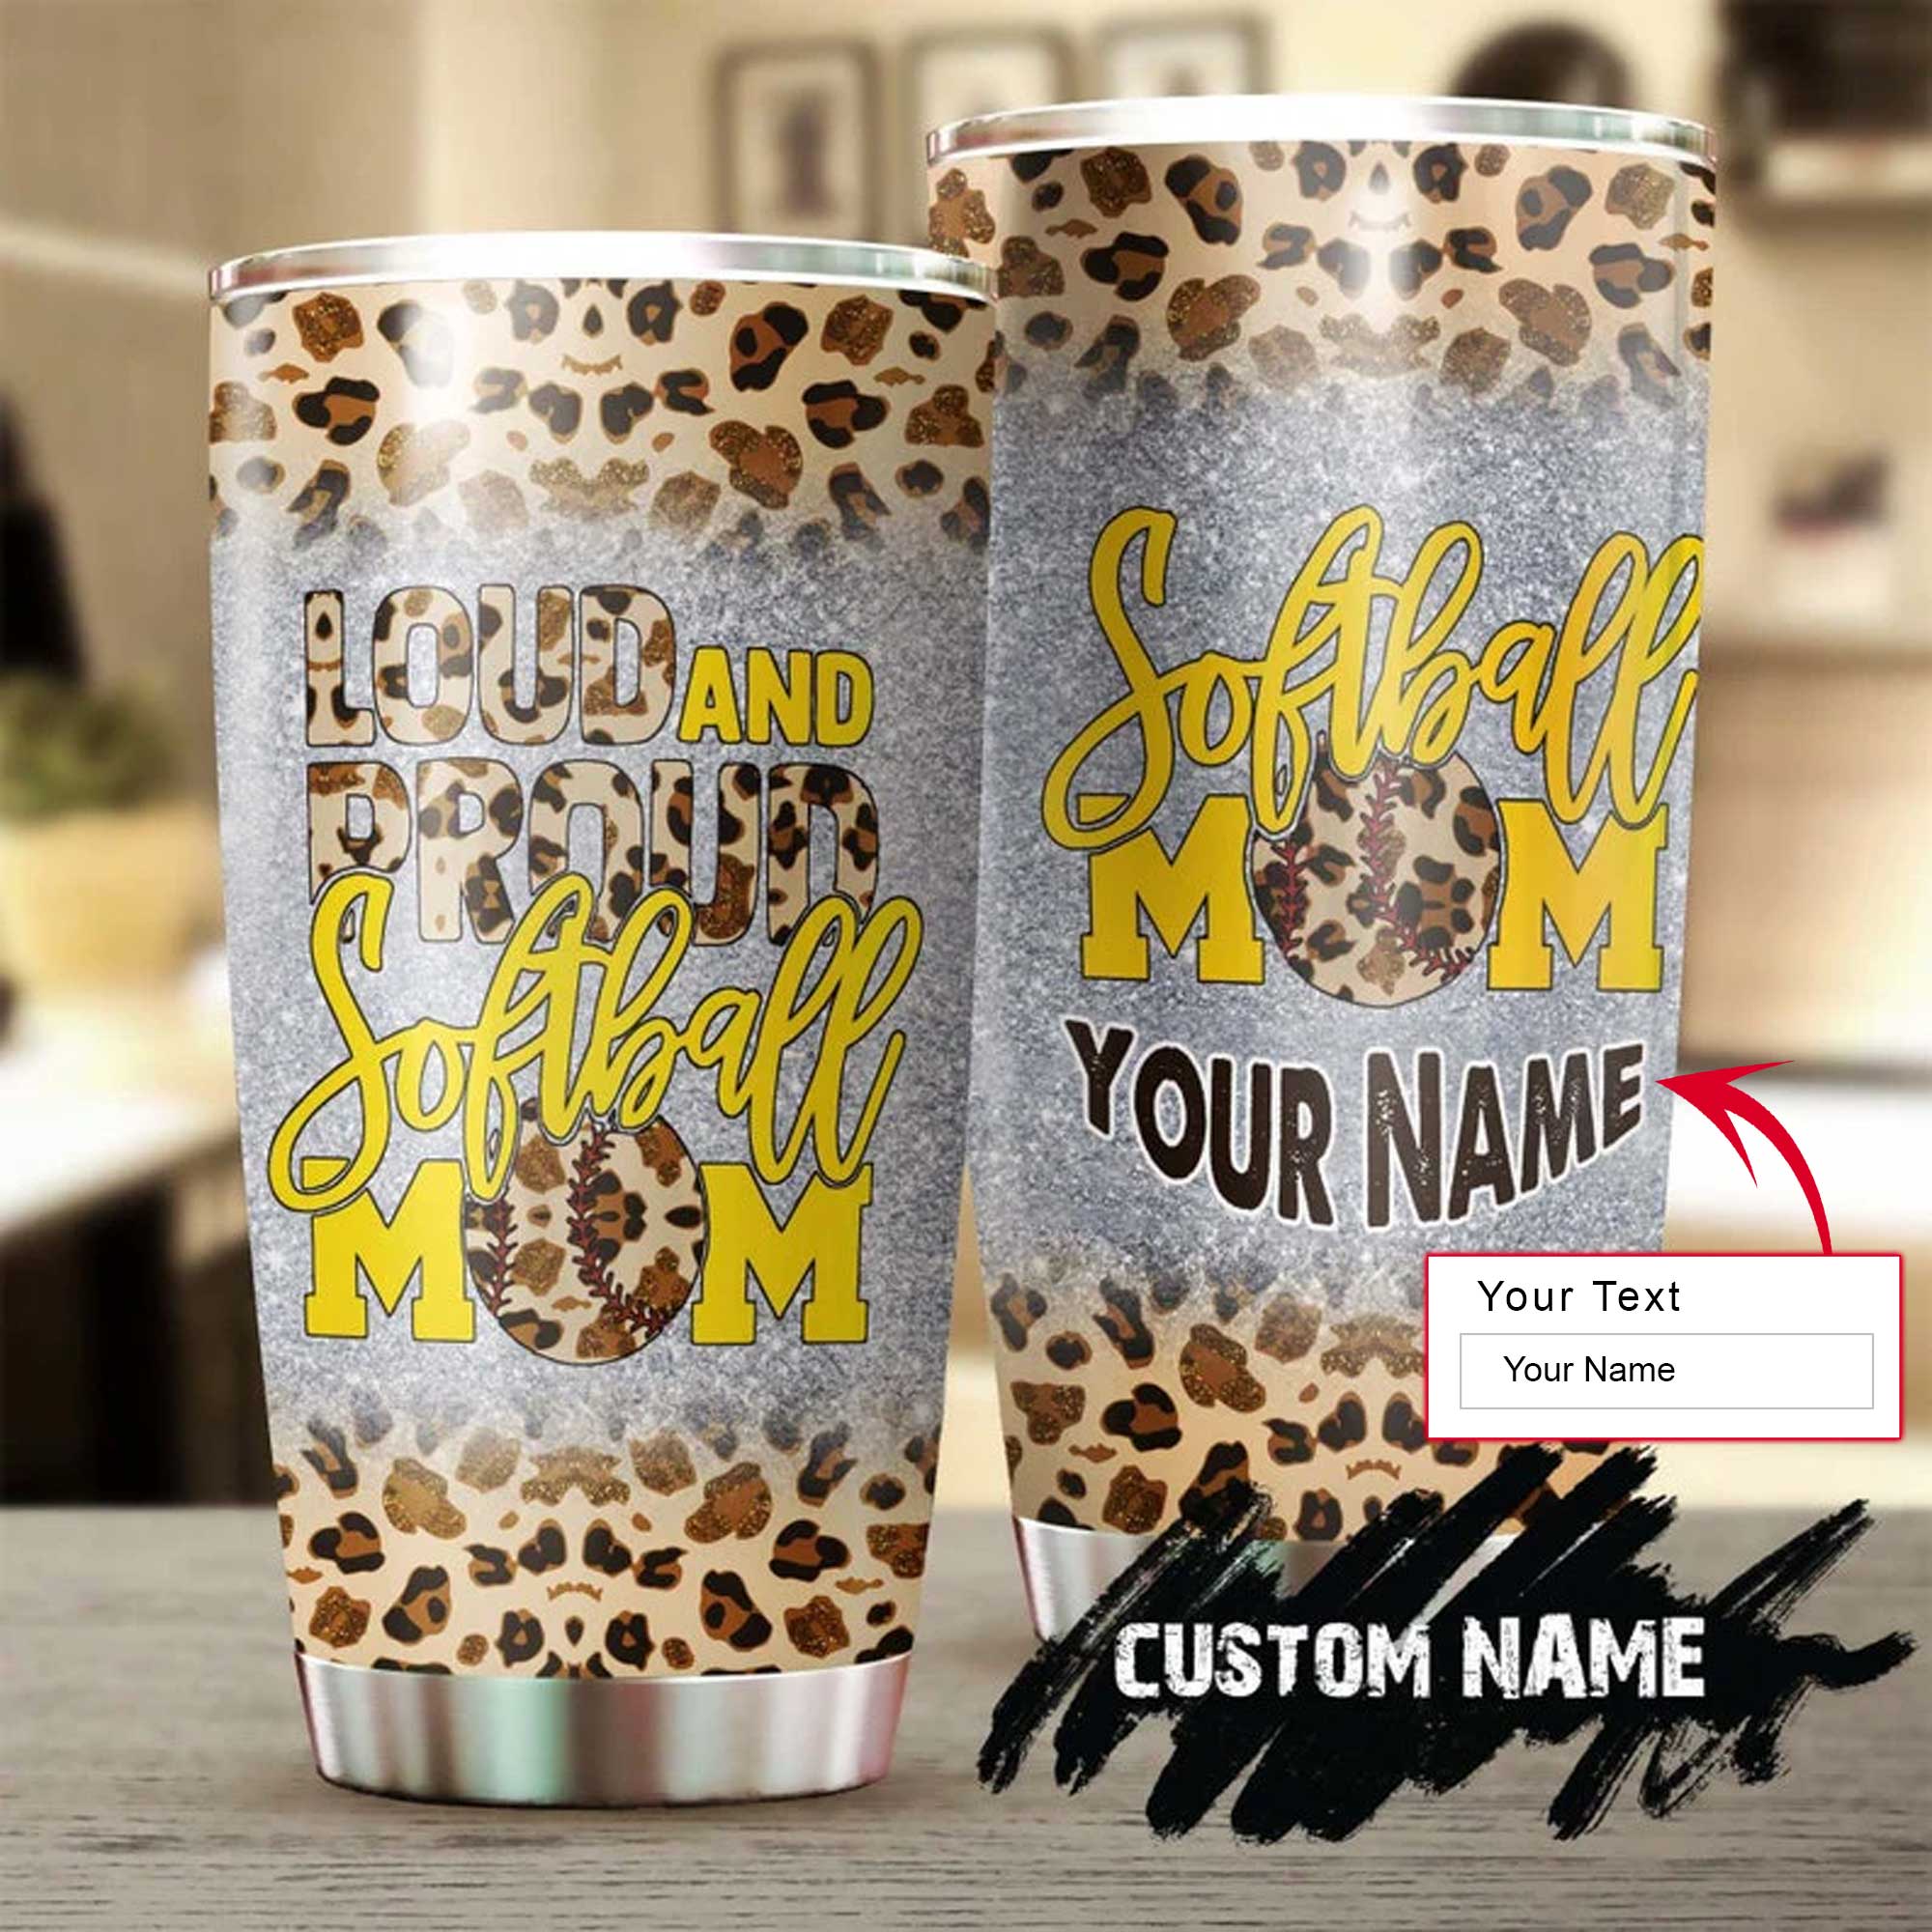 Personalized Mother's Day Gift Tumbler - Custom Gift For Mother's Day, Presents for Mom - Loud And Proud Softball Mom Tumbler